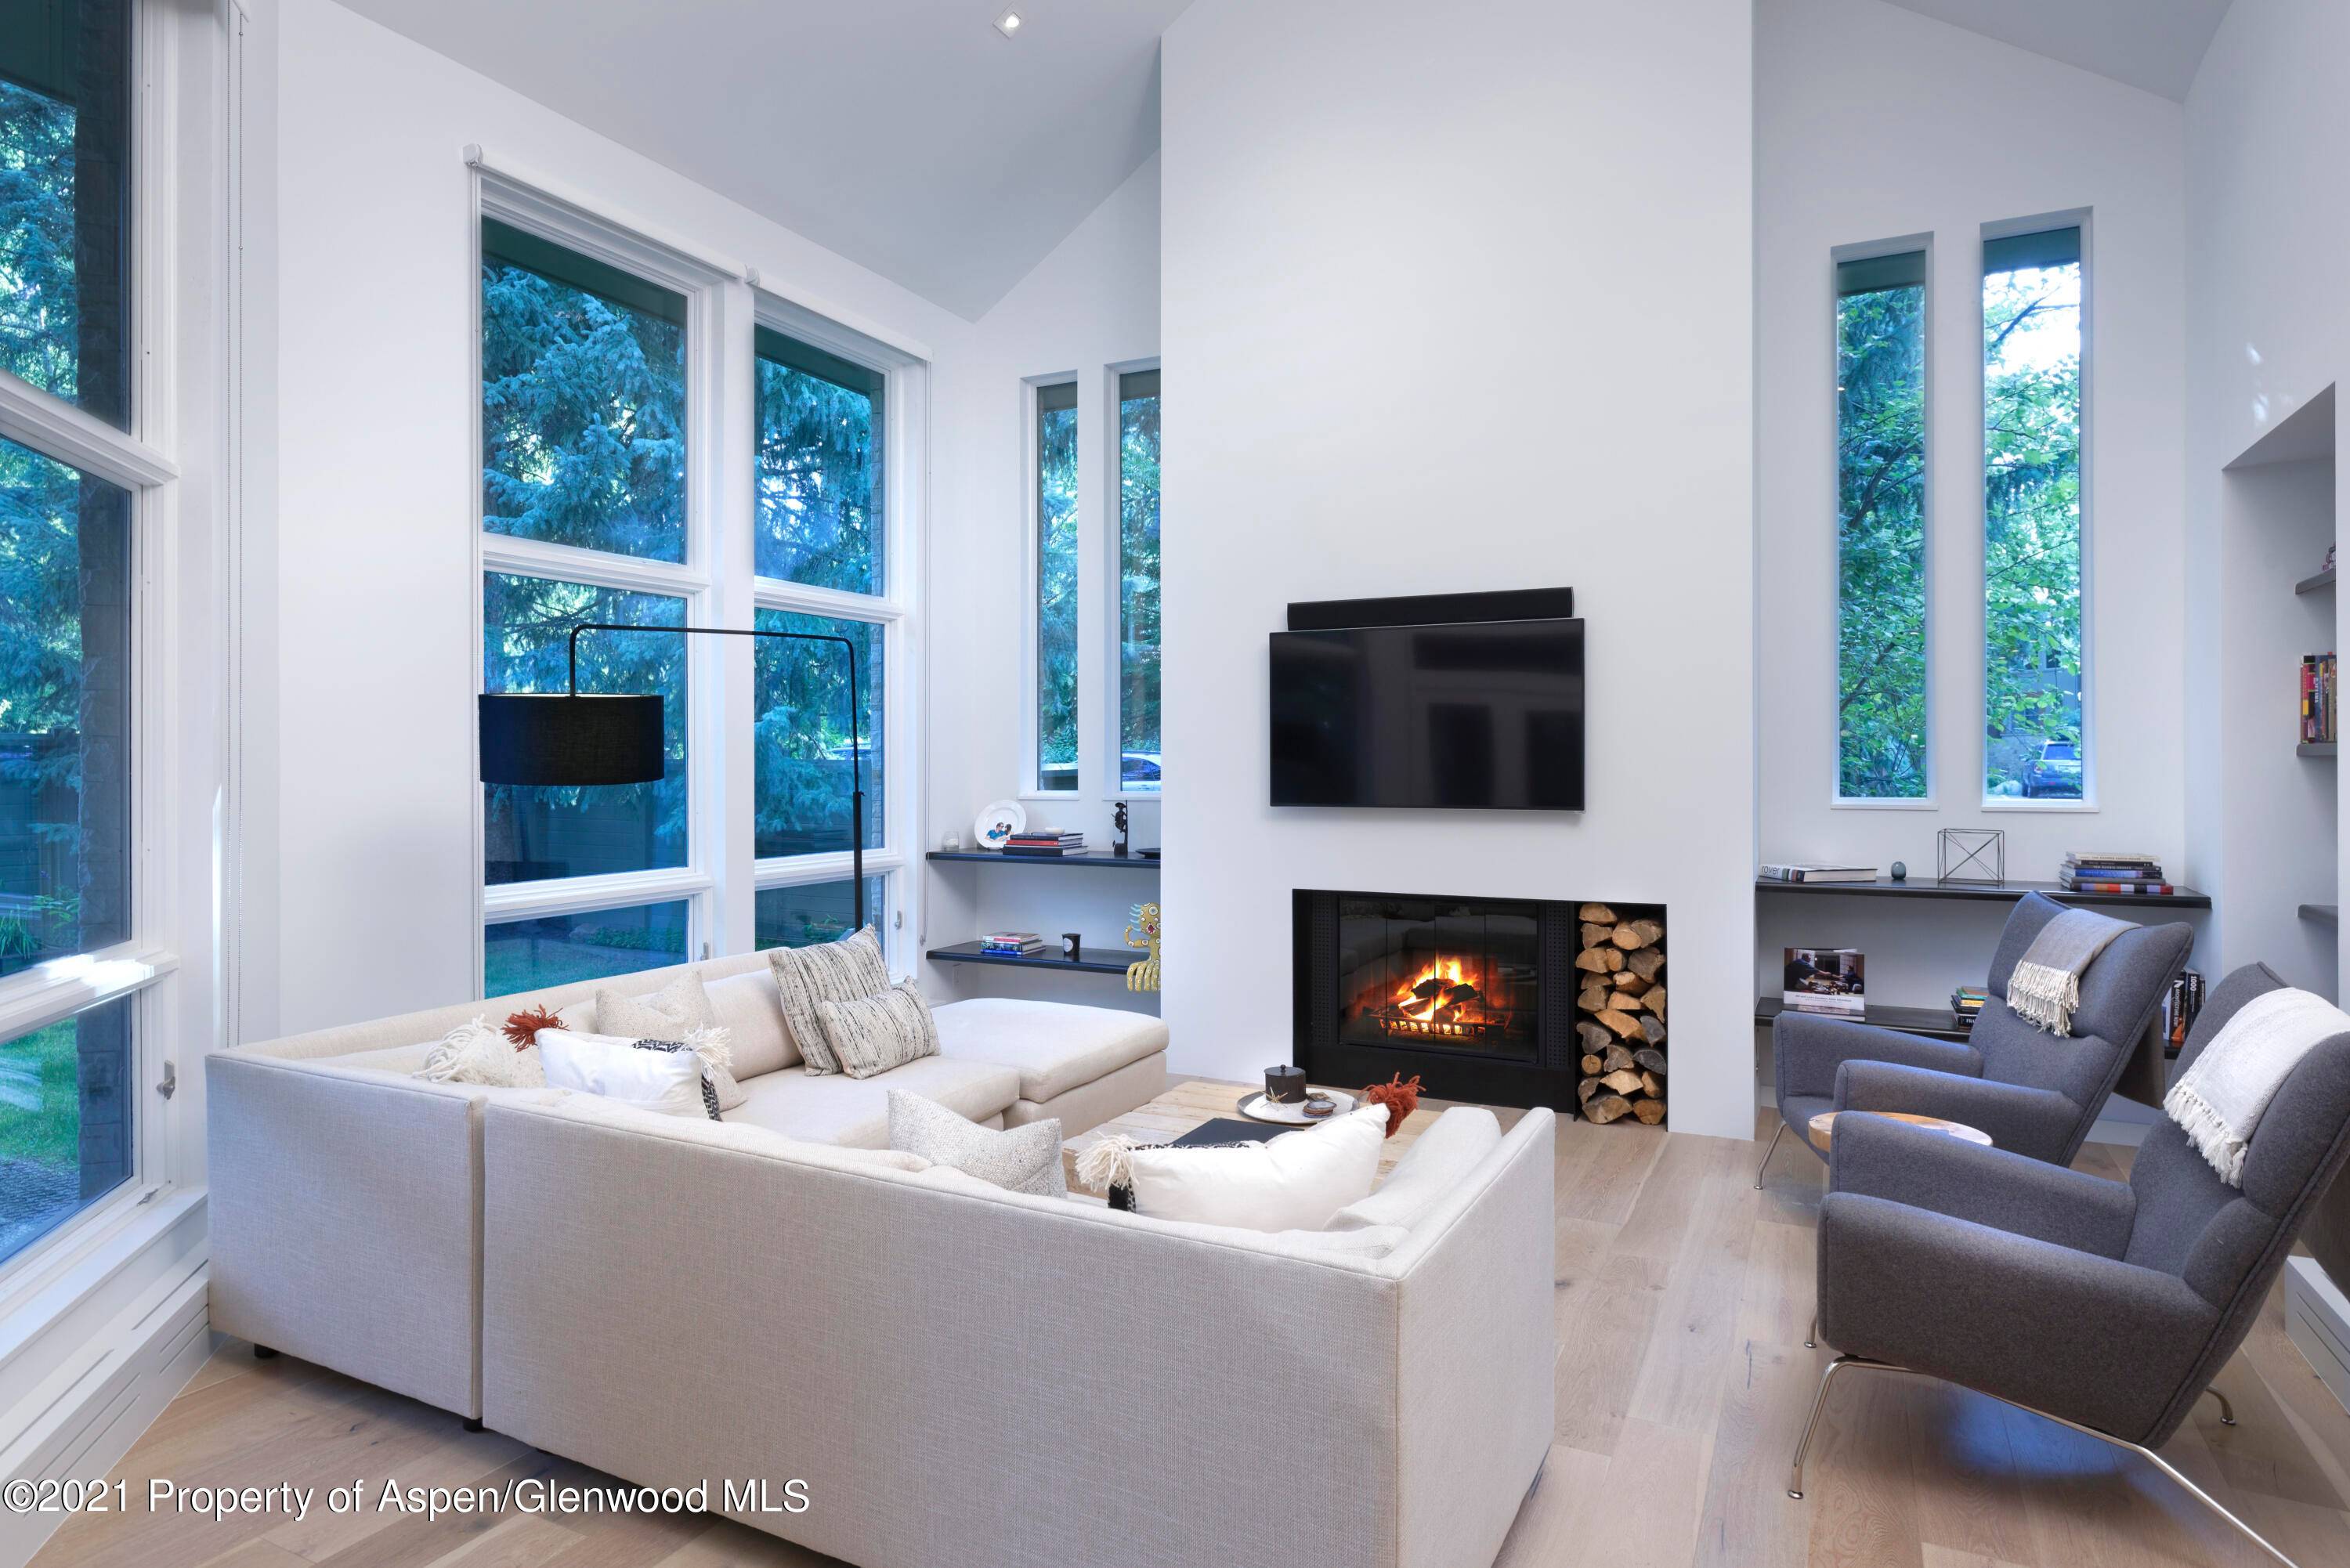 This contemporary home was designed with clean lines, a neutral palette and modern amenities.